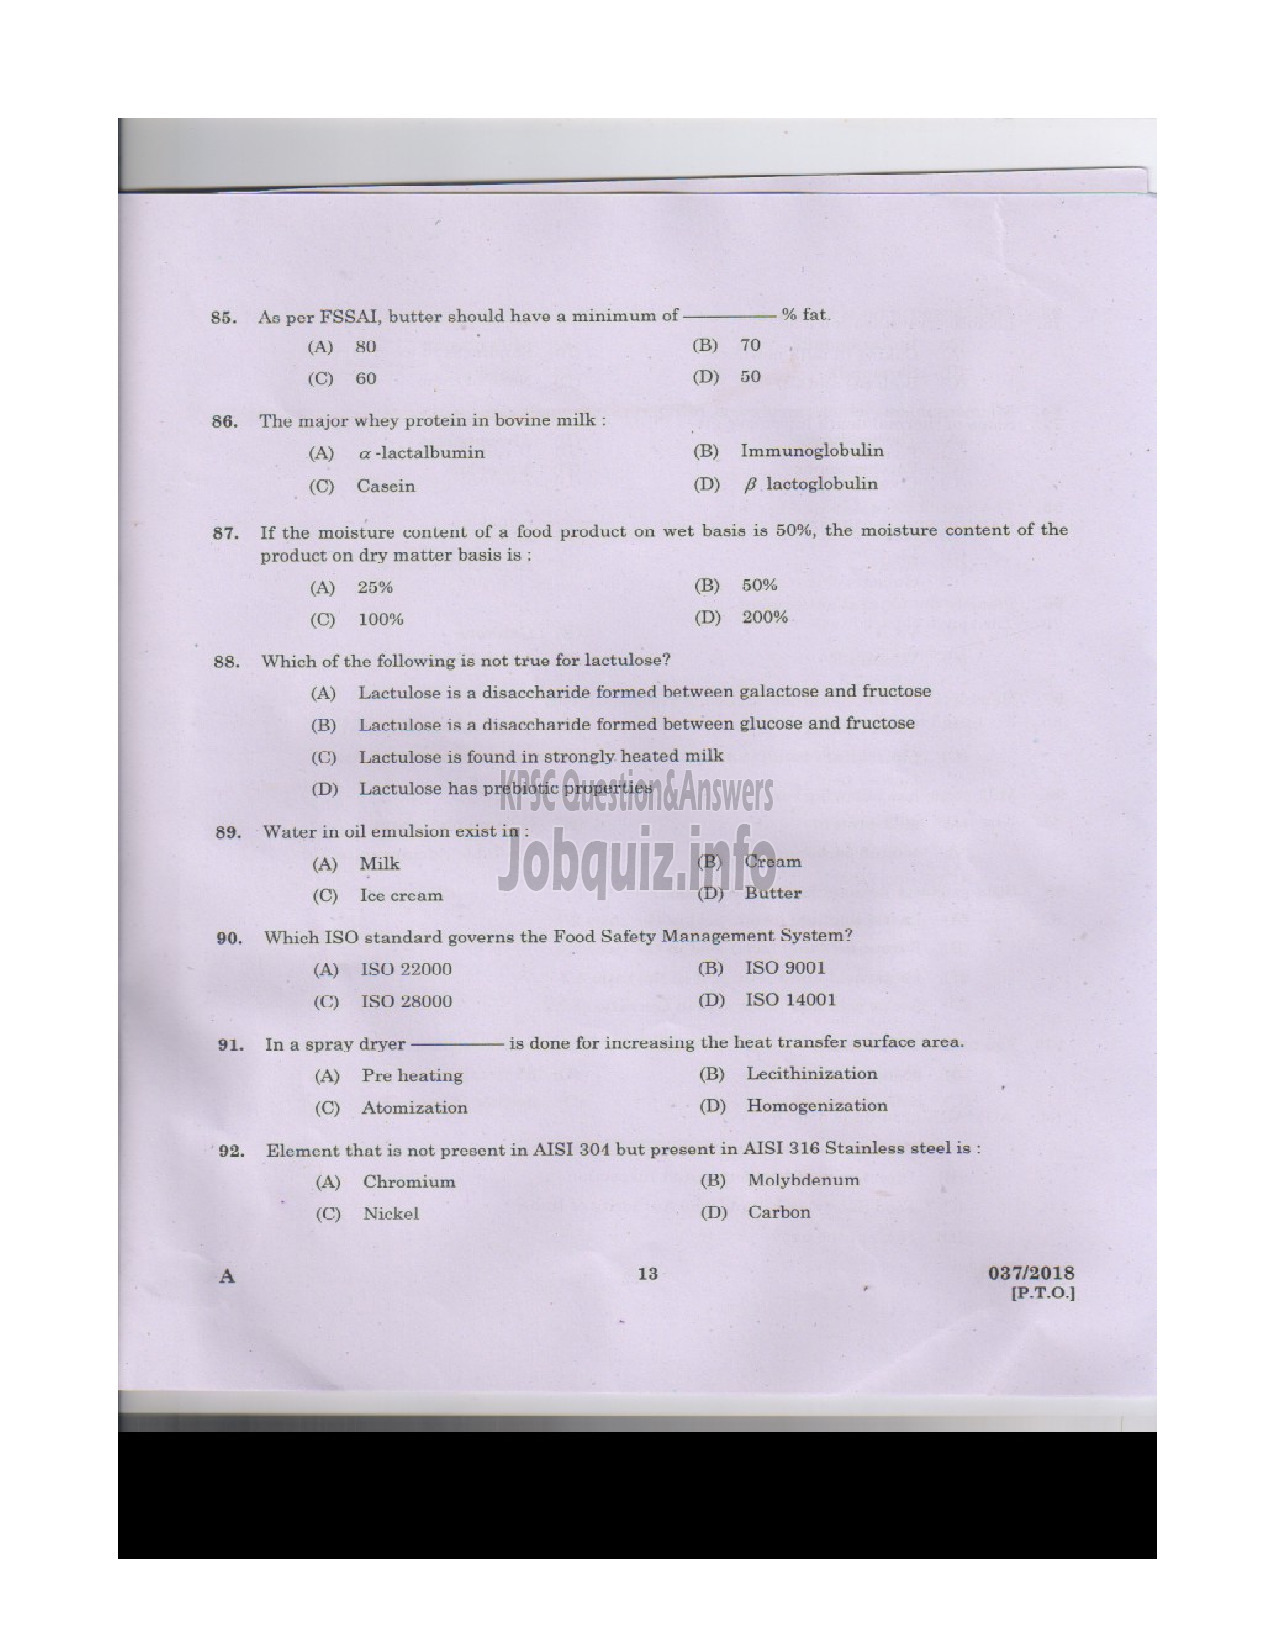 Kerala PSC Question Paper - VOCATIONAL INSTRUCTOR IN DAIRYING MILK PRODUCTS VHSE-12